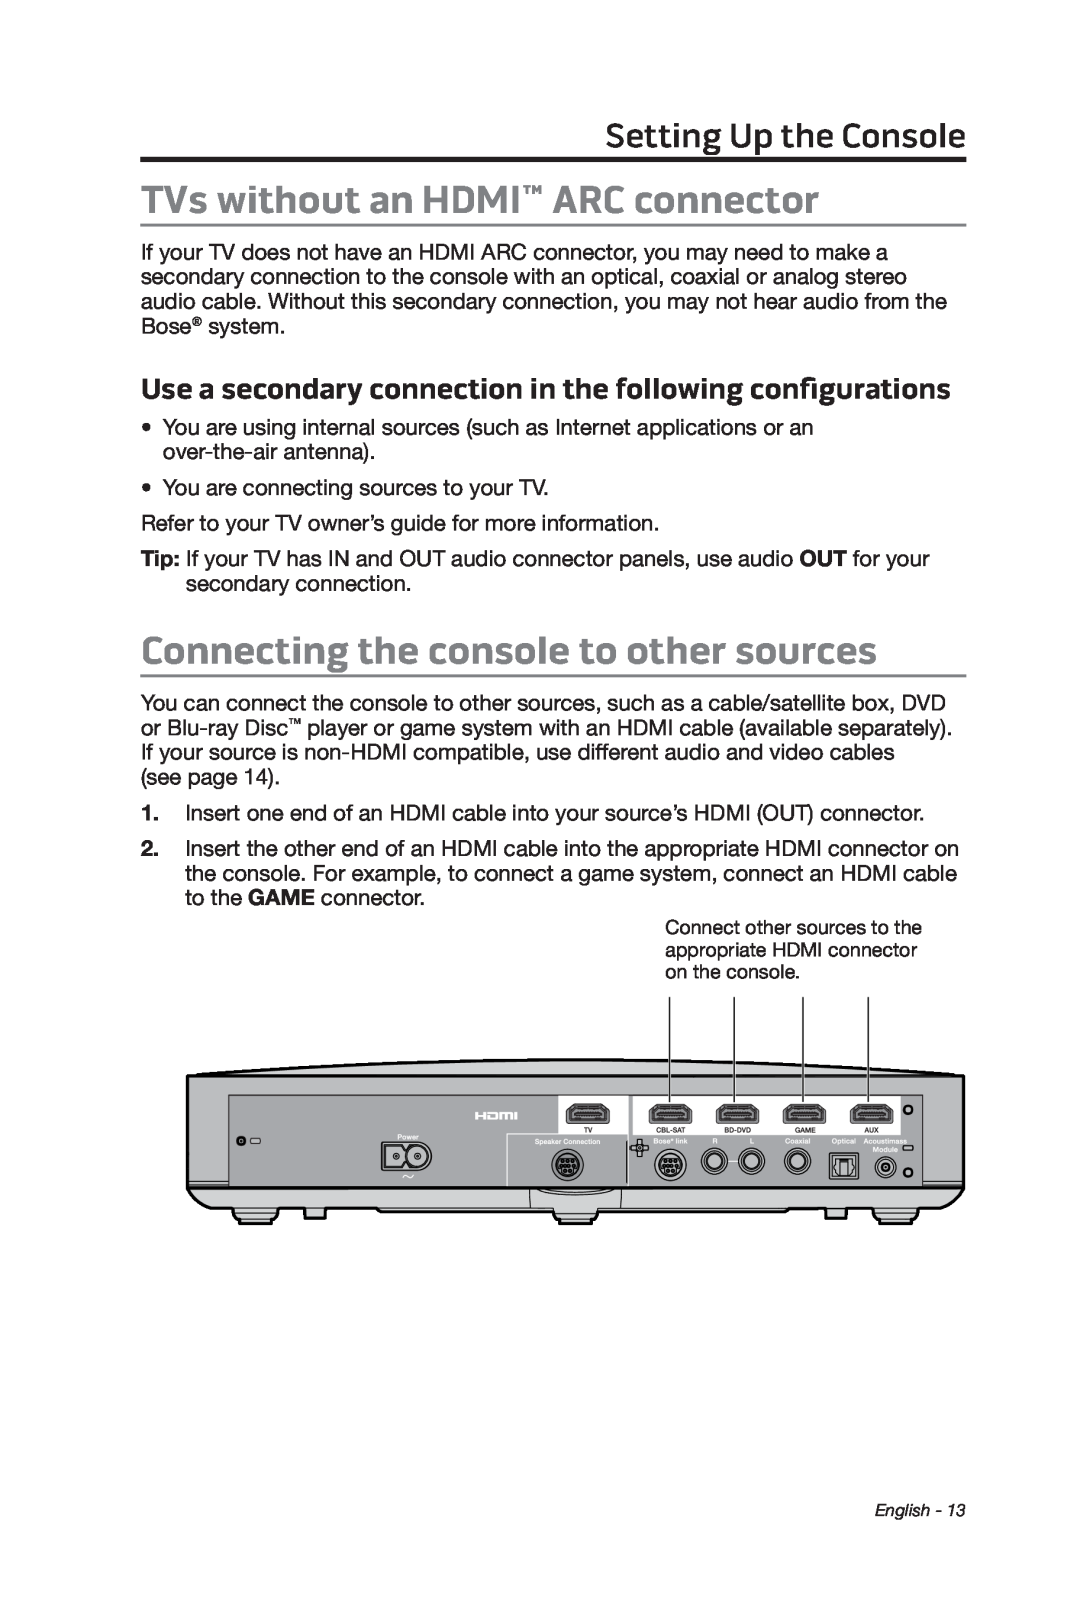 Bose cinemate manual TVs without an HDMI ARC connector, Connecting the console to other sources, Setting Up the Console 